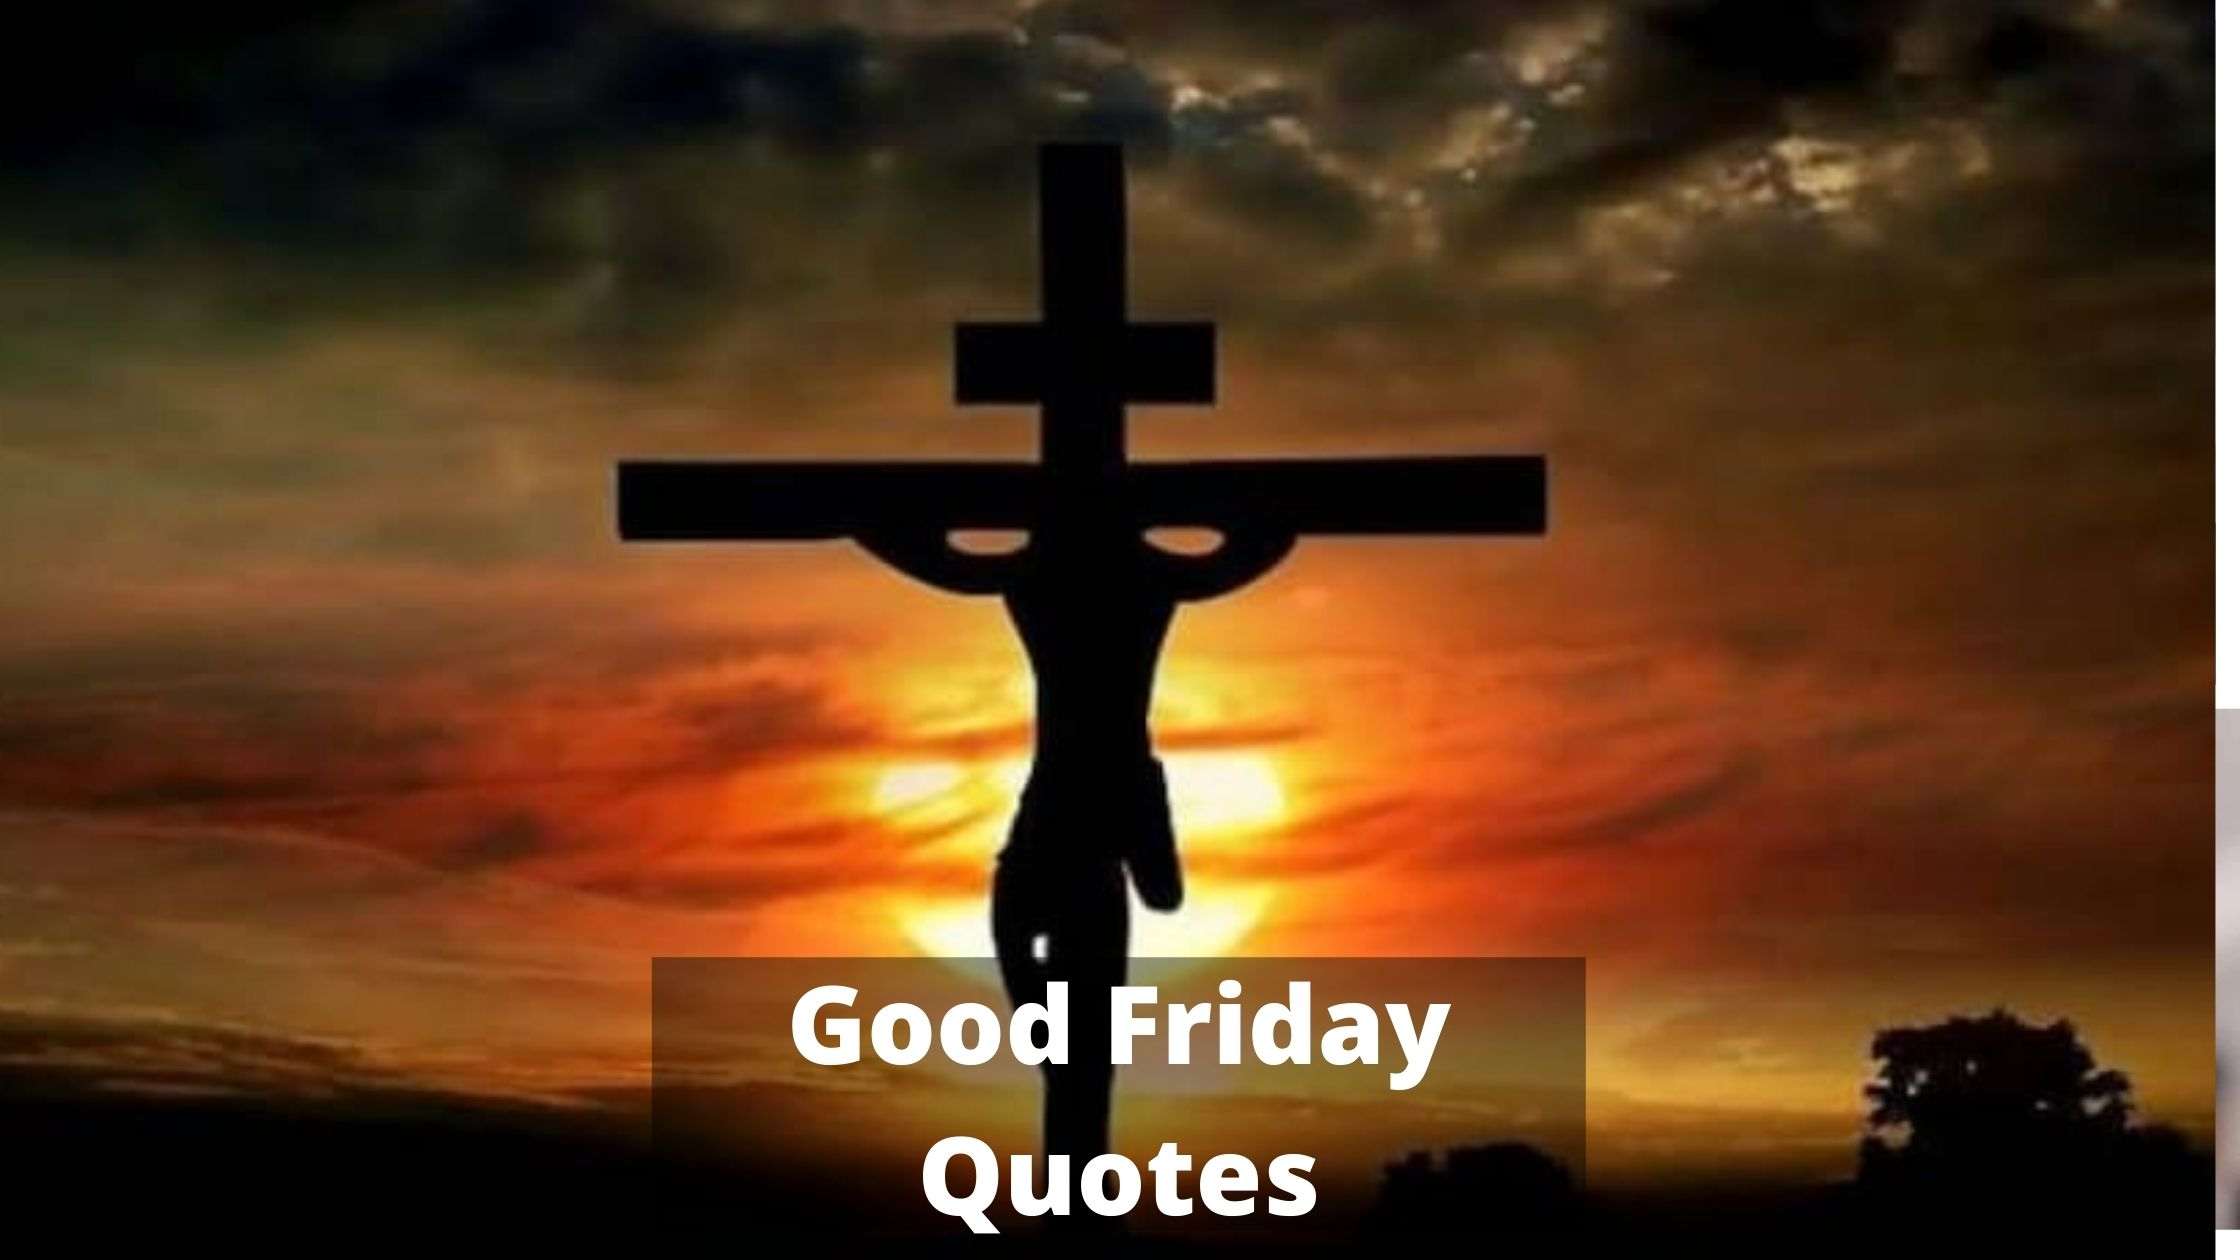 Good Friday Quotes 25 Quotes to Help You Reflect on the True Meaning of the Holiday